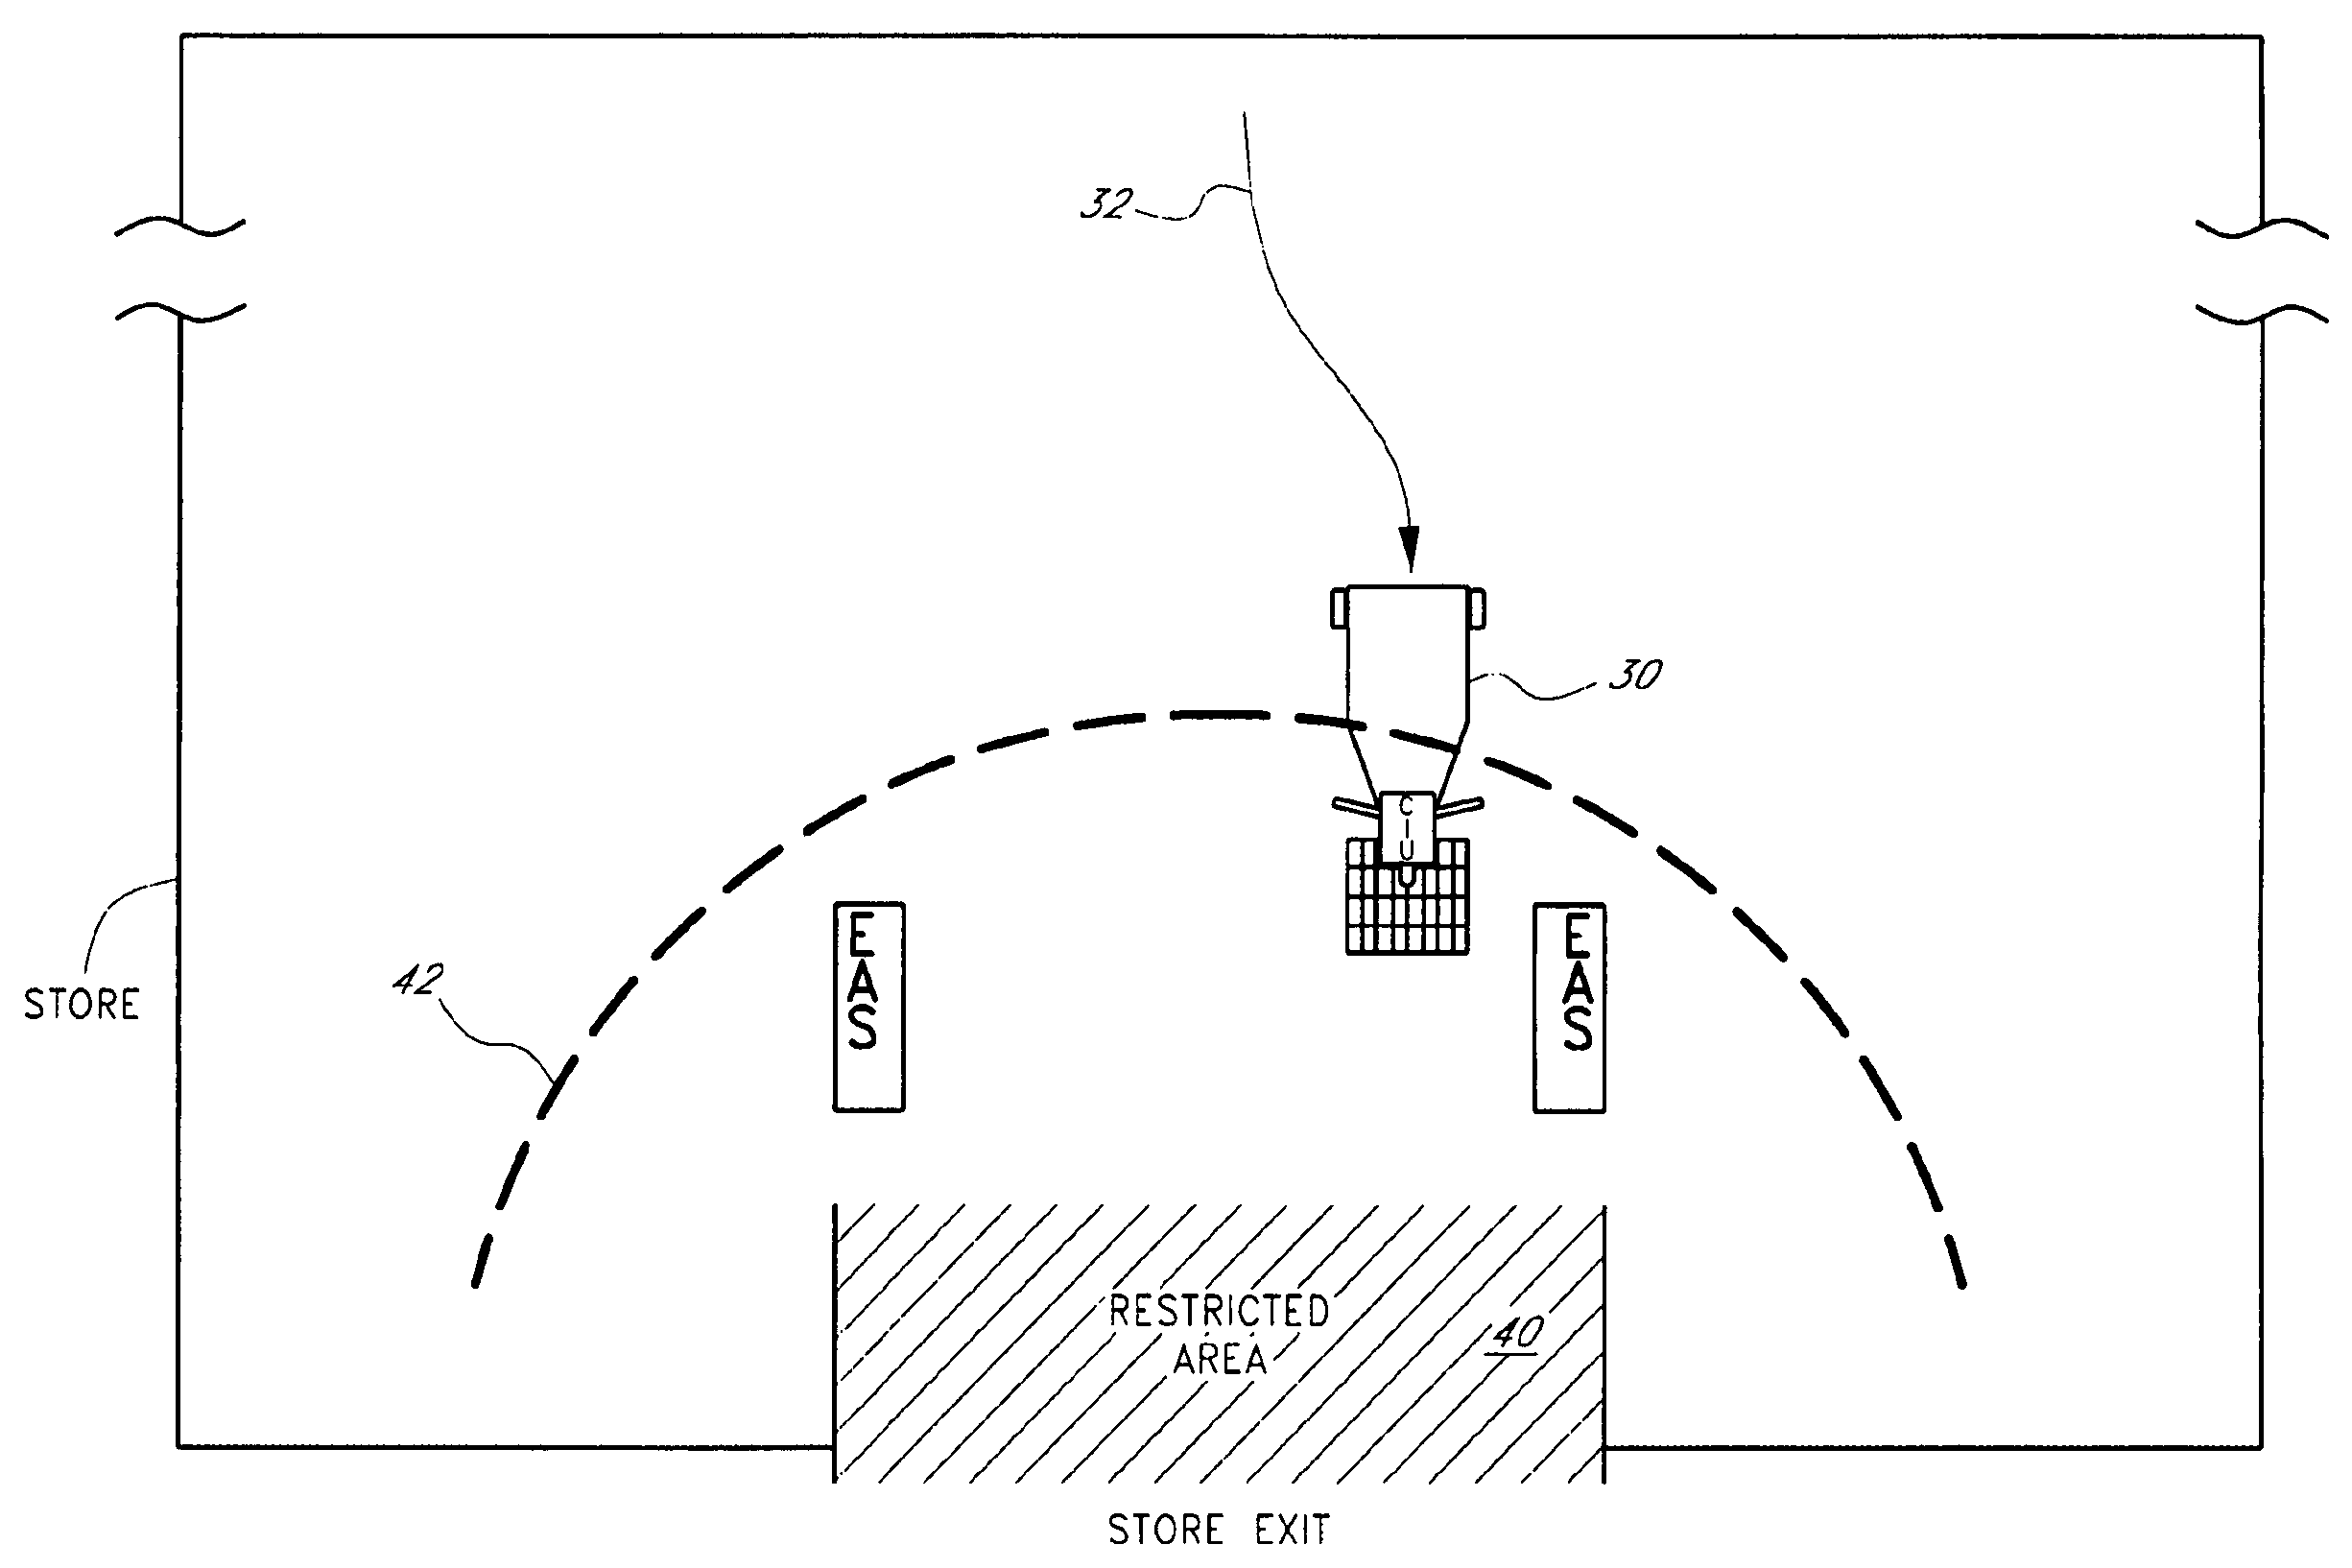 Systems and methods for locating and controlling powered vehicles